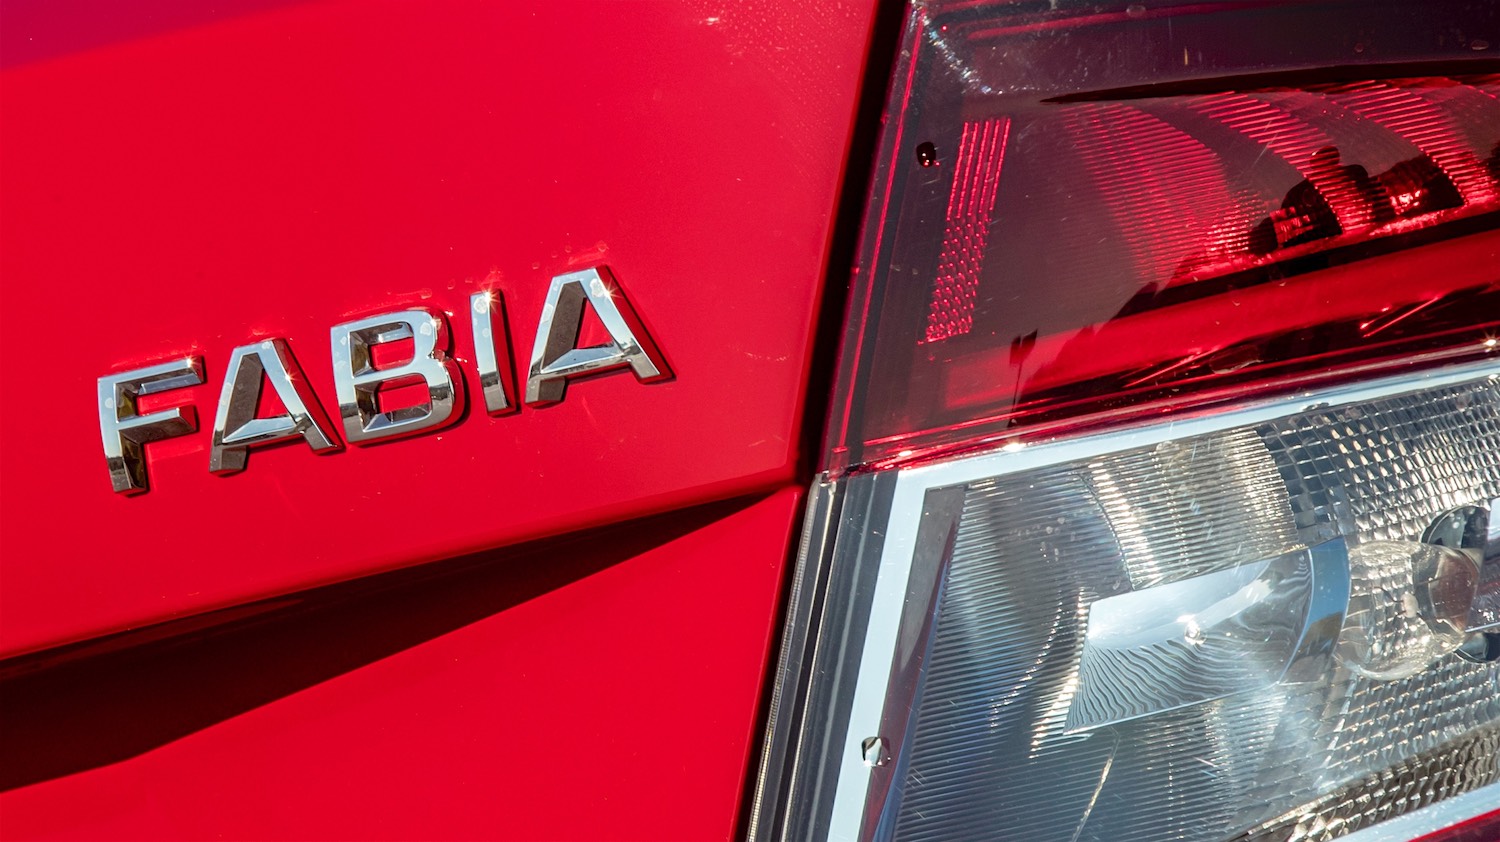 Tim Barnes Clay reviews the upated Skoda Fabia Monte Carlo for drive 12